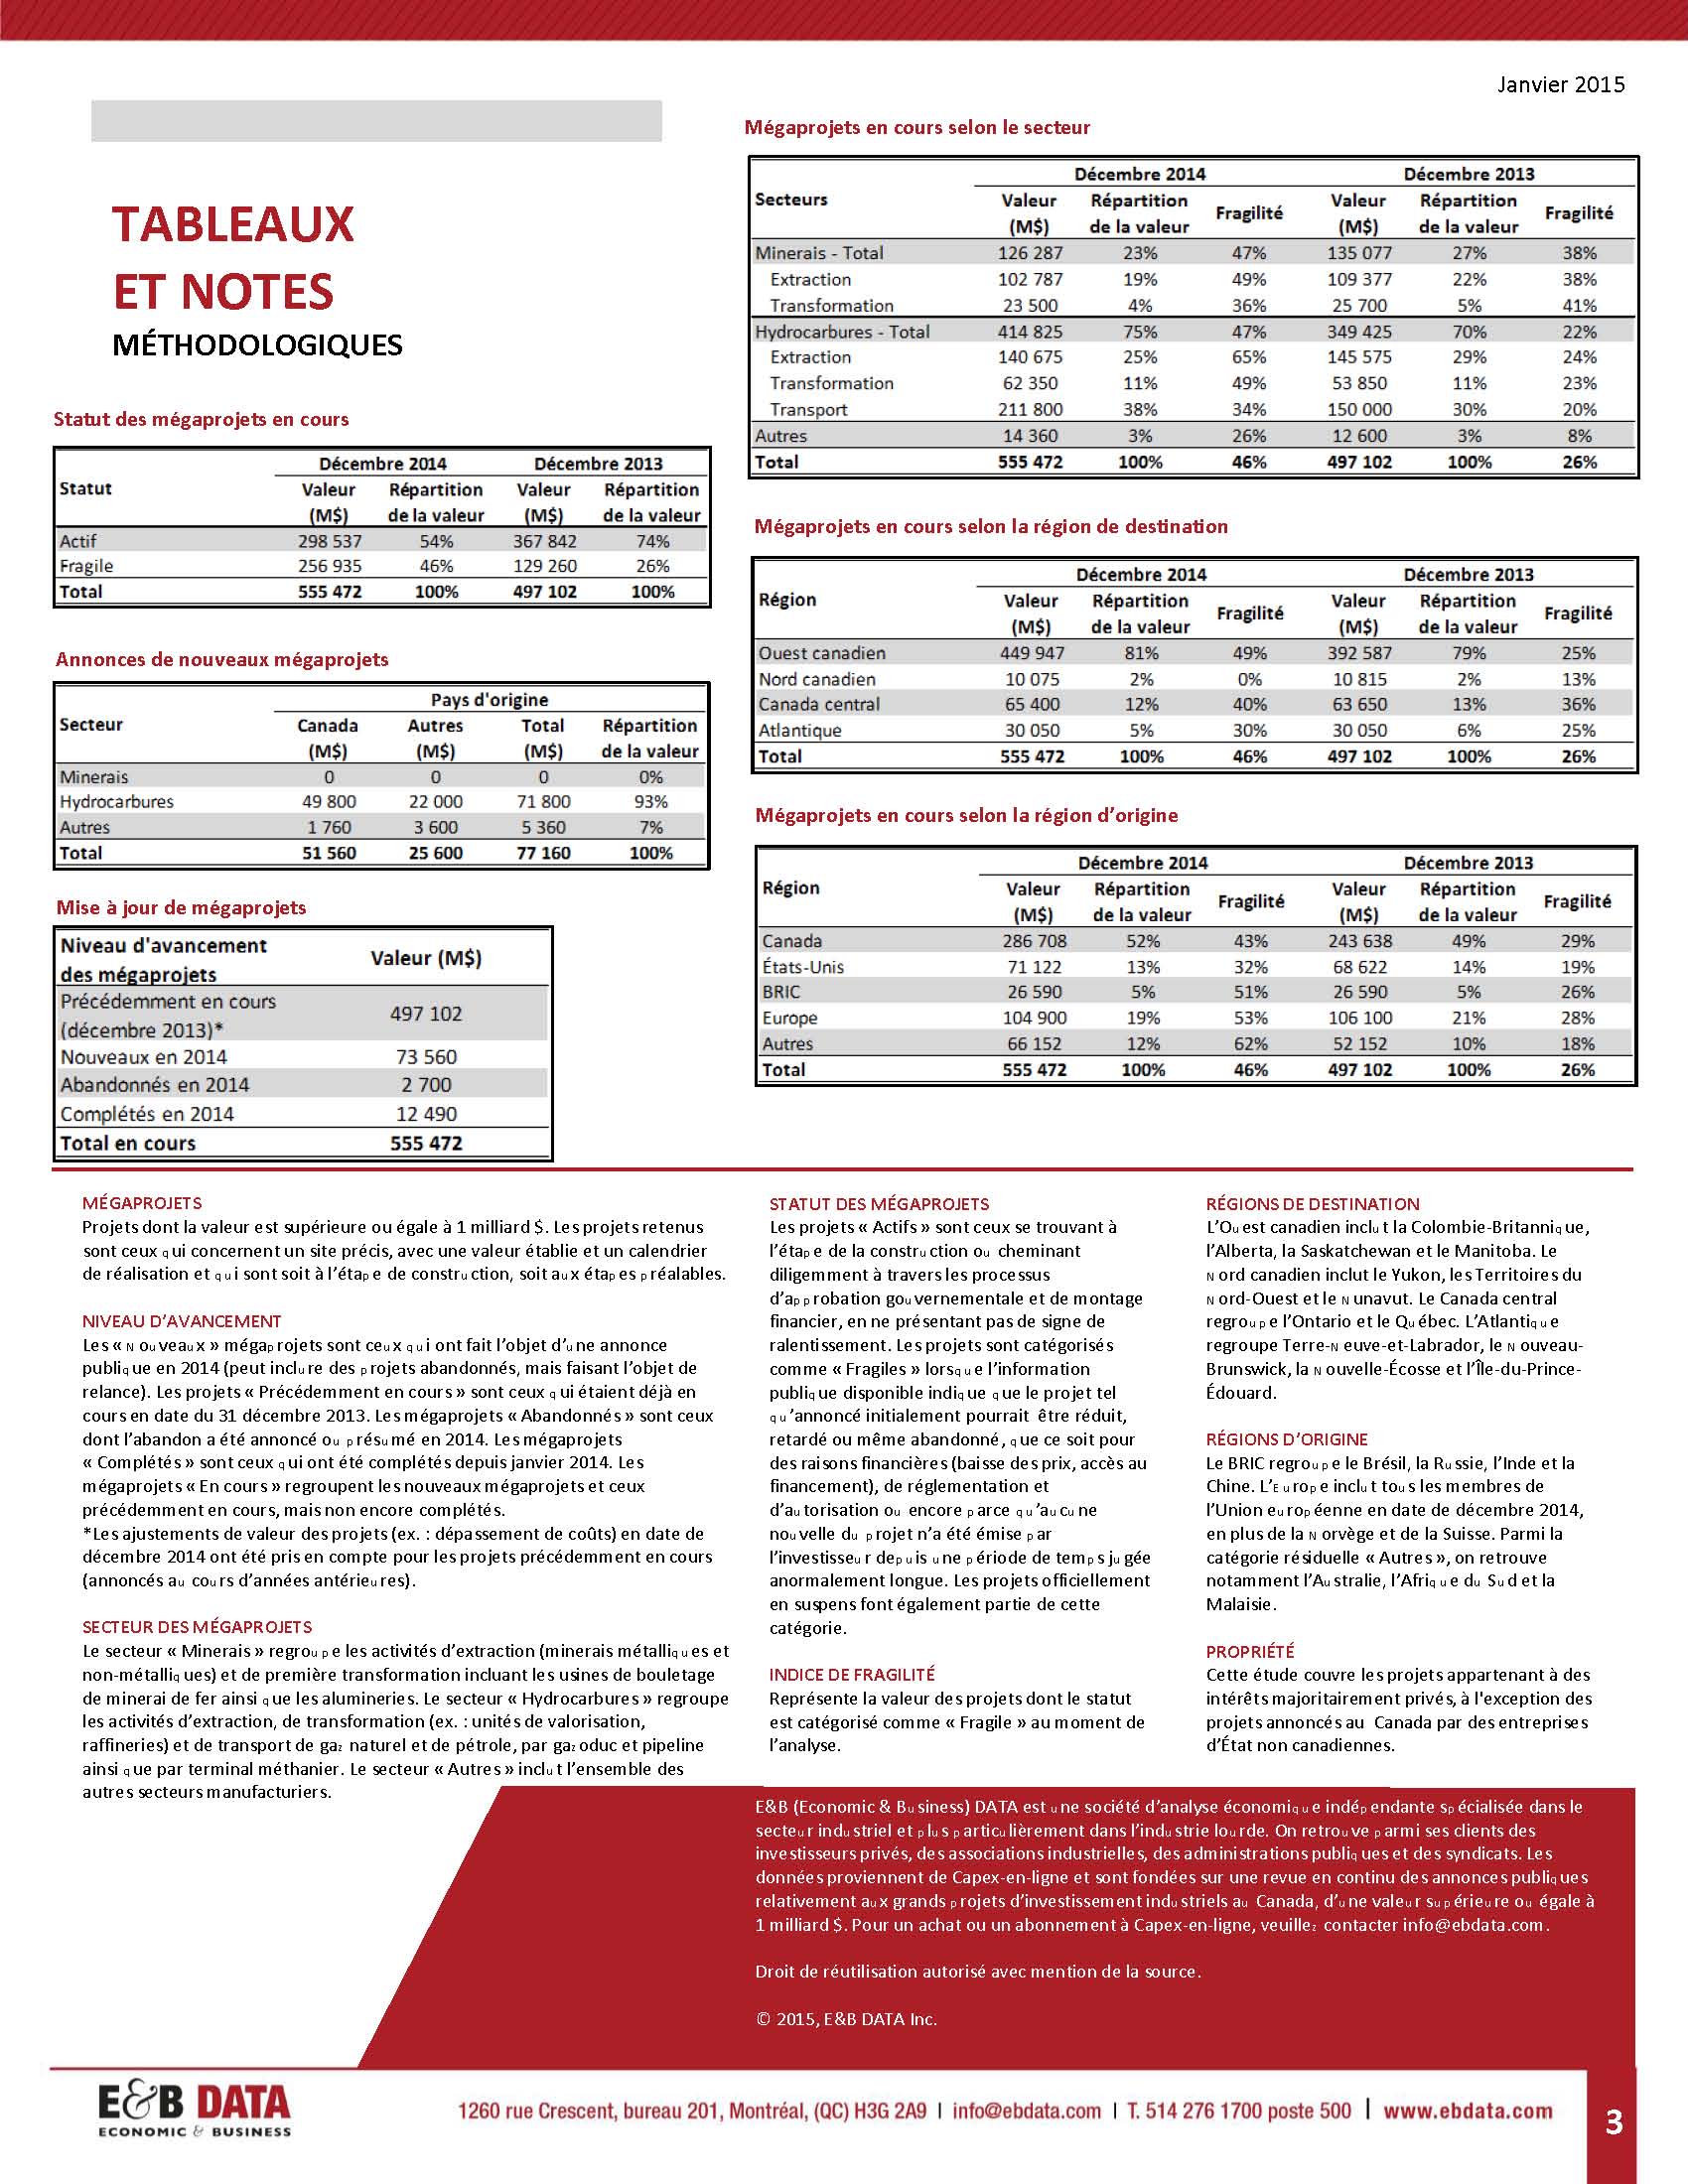 Perspectives Mégaprojets - 4Q14-F_Page_3